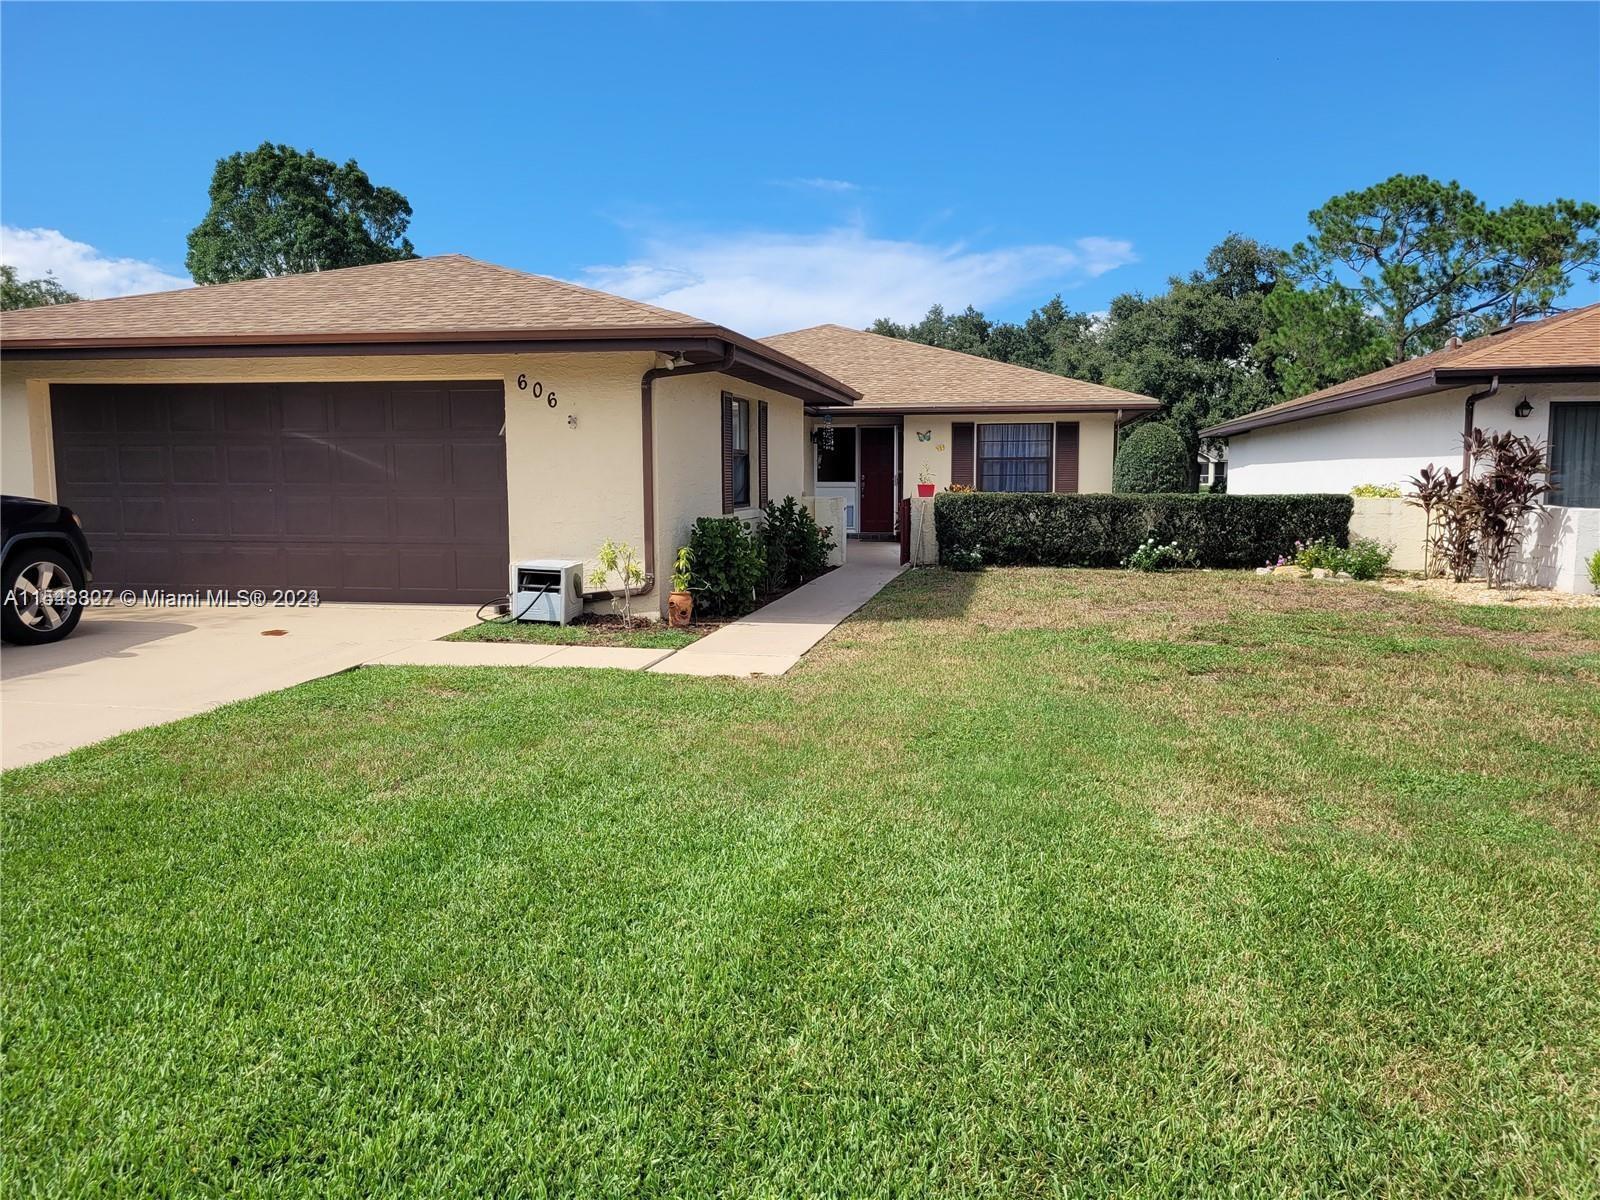 Photo of 606 Turnberry Ct in Winter Haven, FL